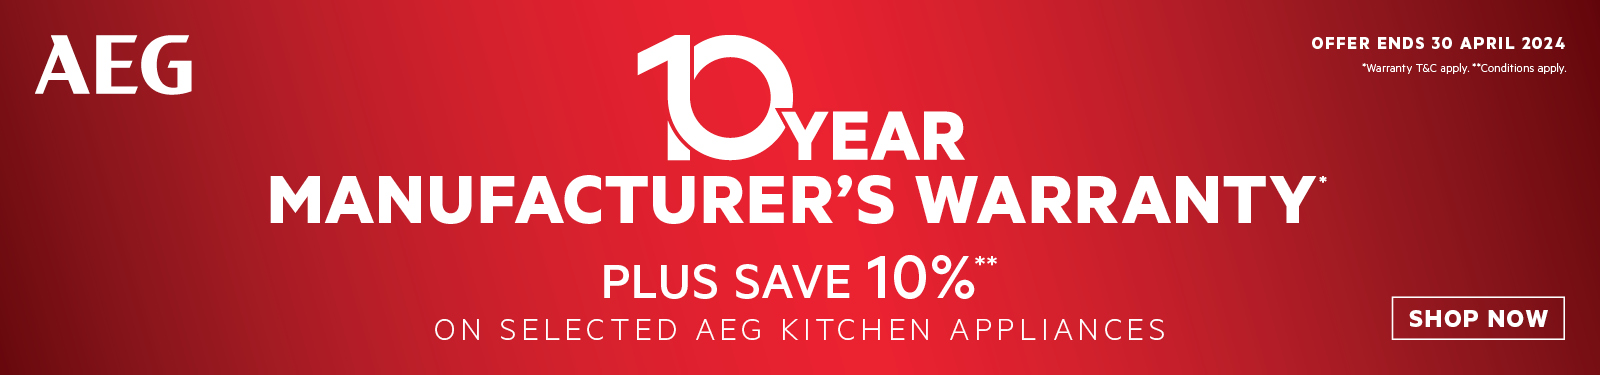 10 Year Manufacturer’s Warranty, Plus Save 10% On Selected AEG Kitchen Appliances at Retravision